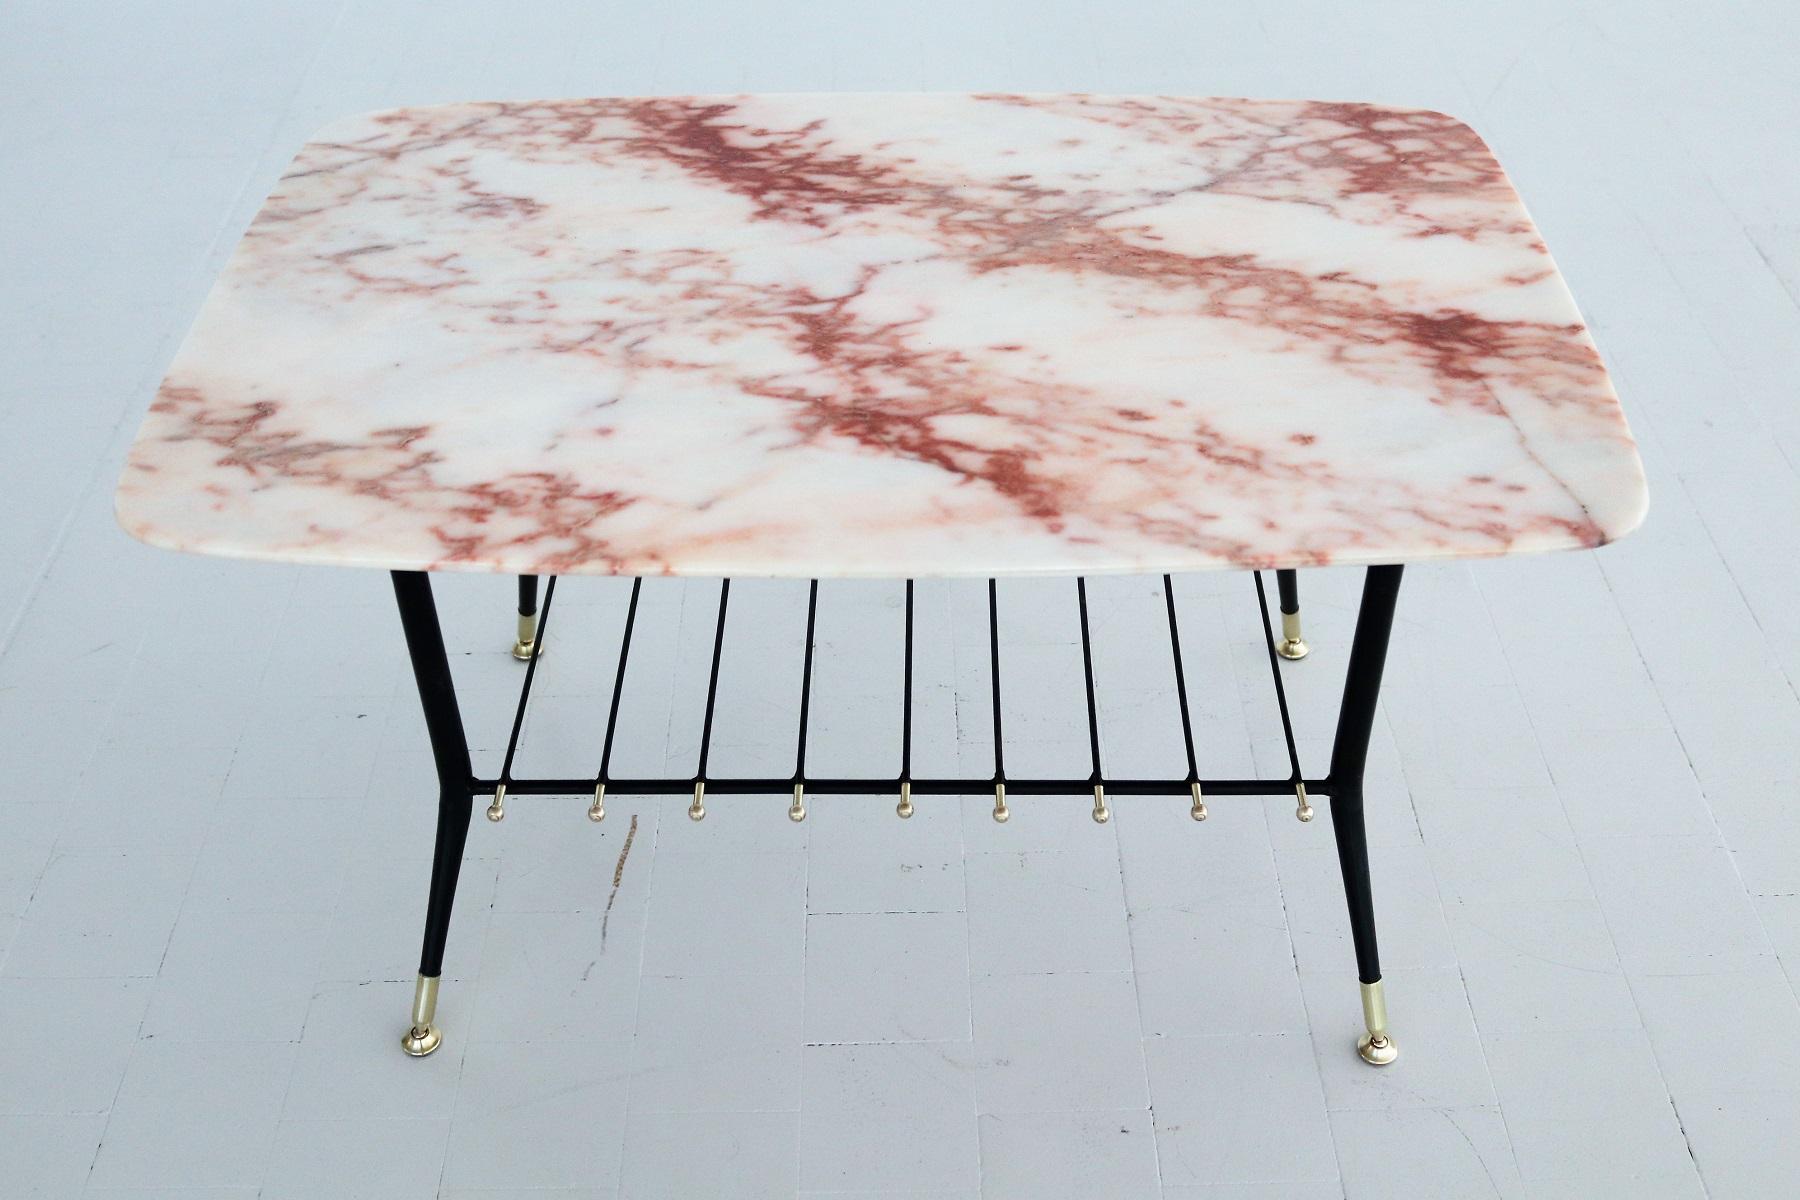 Beautiful coffee table with gorgeous marble top with pink veins and magazines tray in metal with brass tips and details.
Made in Italy during the 1970s.
The marble is called pink Portugal marble and has a beautiful natural marble design with